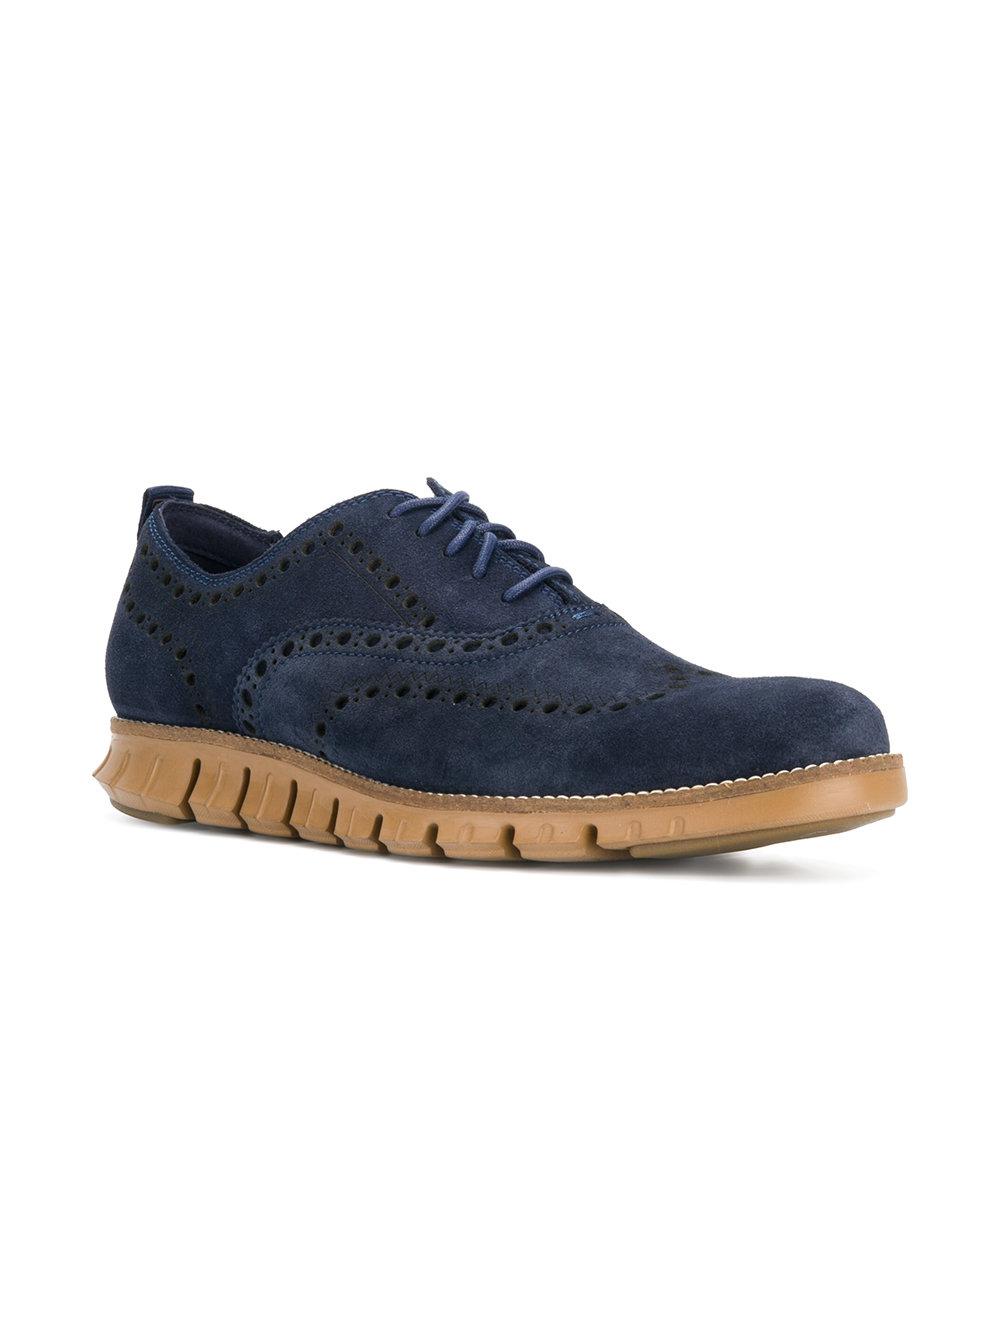 Cole Haan Suede Ridged Sole Oxford Shoes in Blue for Men - Lyst